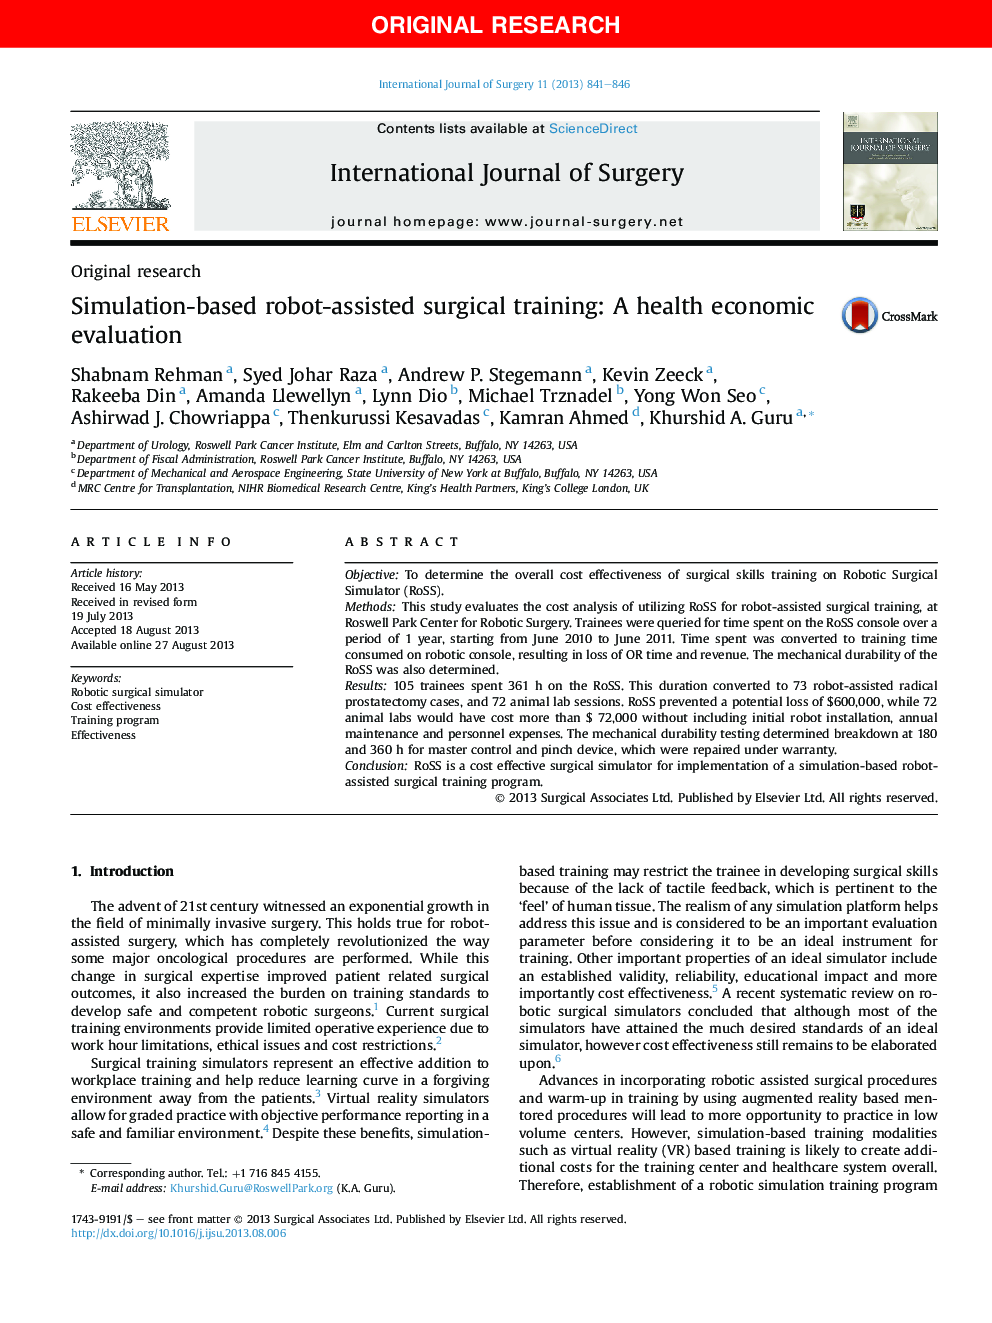 Simulation-based robot-assisted surgical training: A health economic evaluation